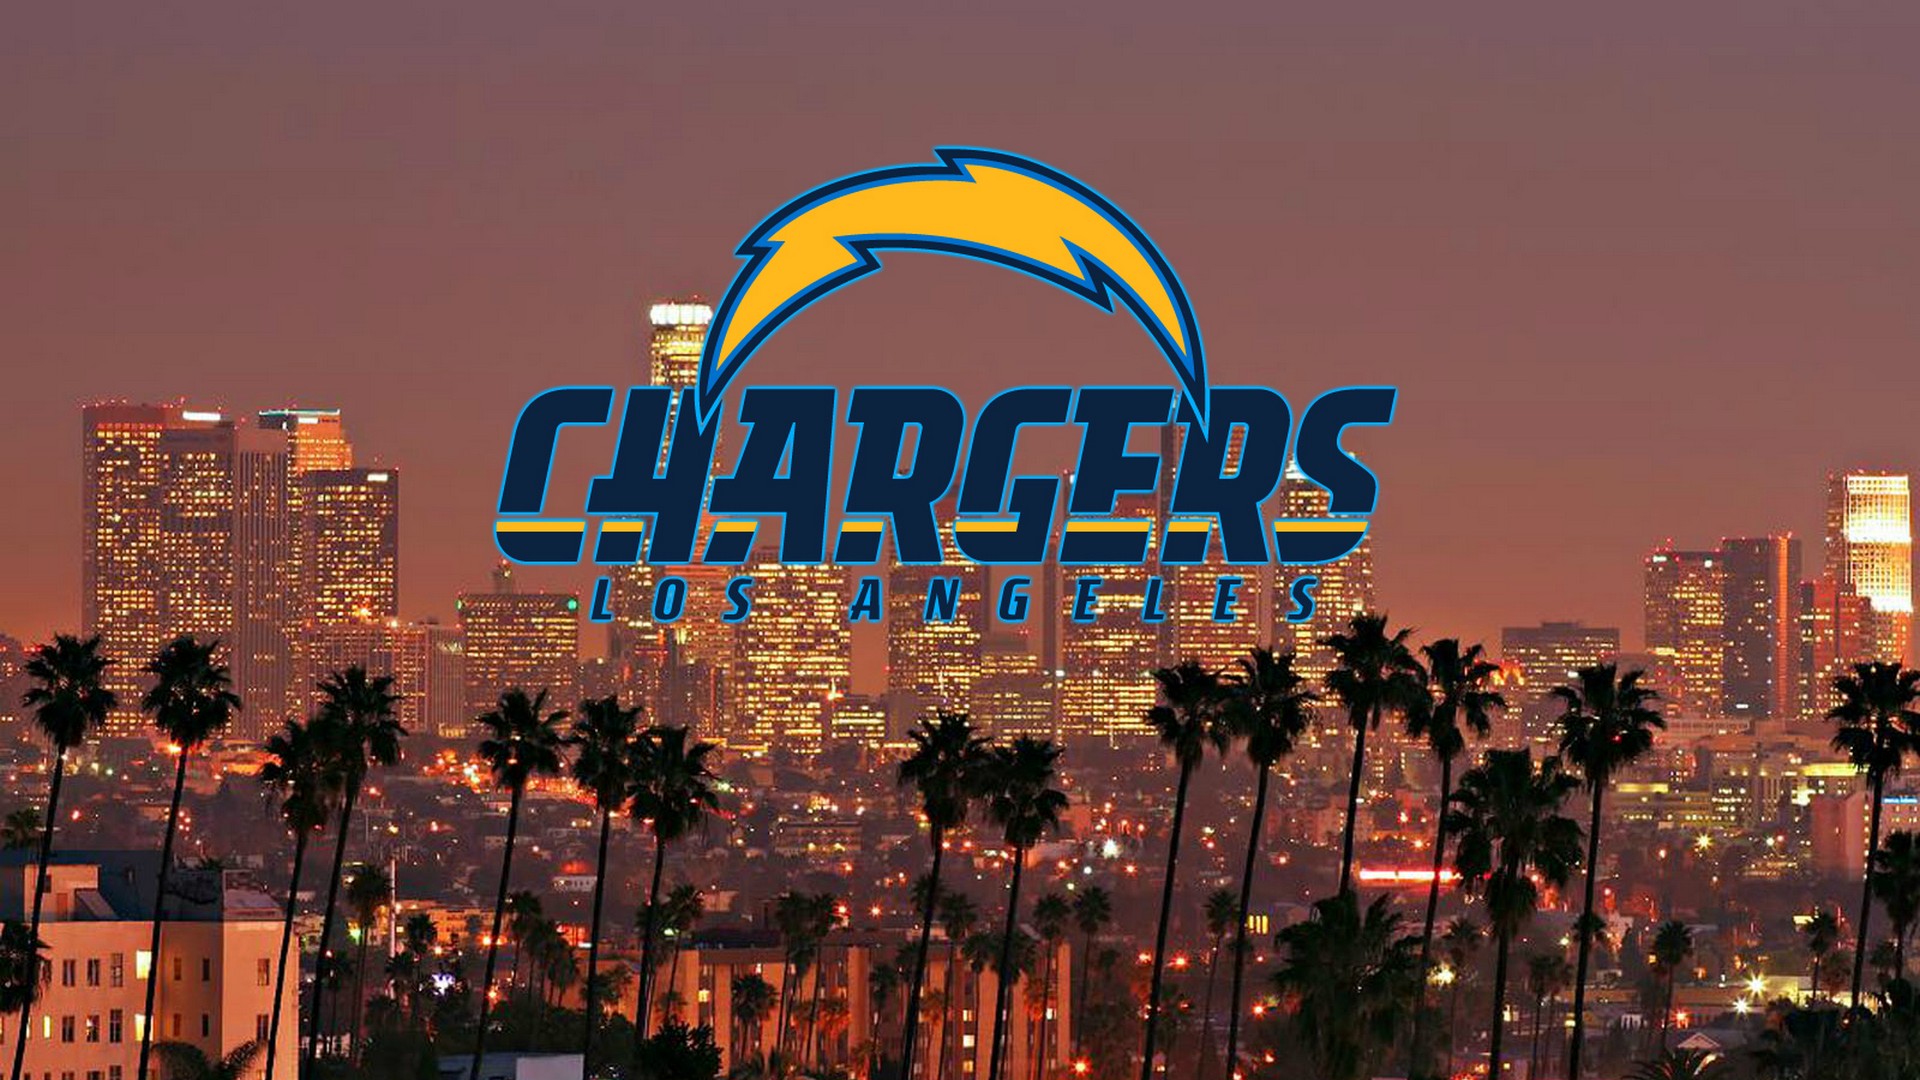 HD Desktop Wallpaper Los Angeles Chargers With Resolution 1920X1080 pixel. You can make this wallpaper for your Mac or Windows Desktop Background, iPhone, Android or Tablet and another Smartphone device for free